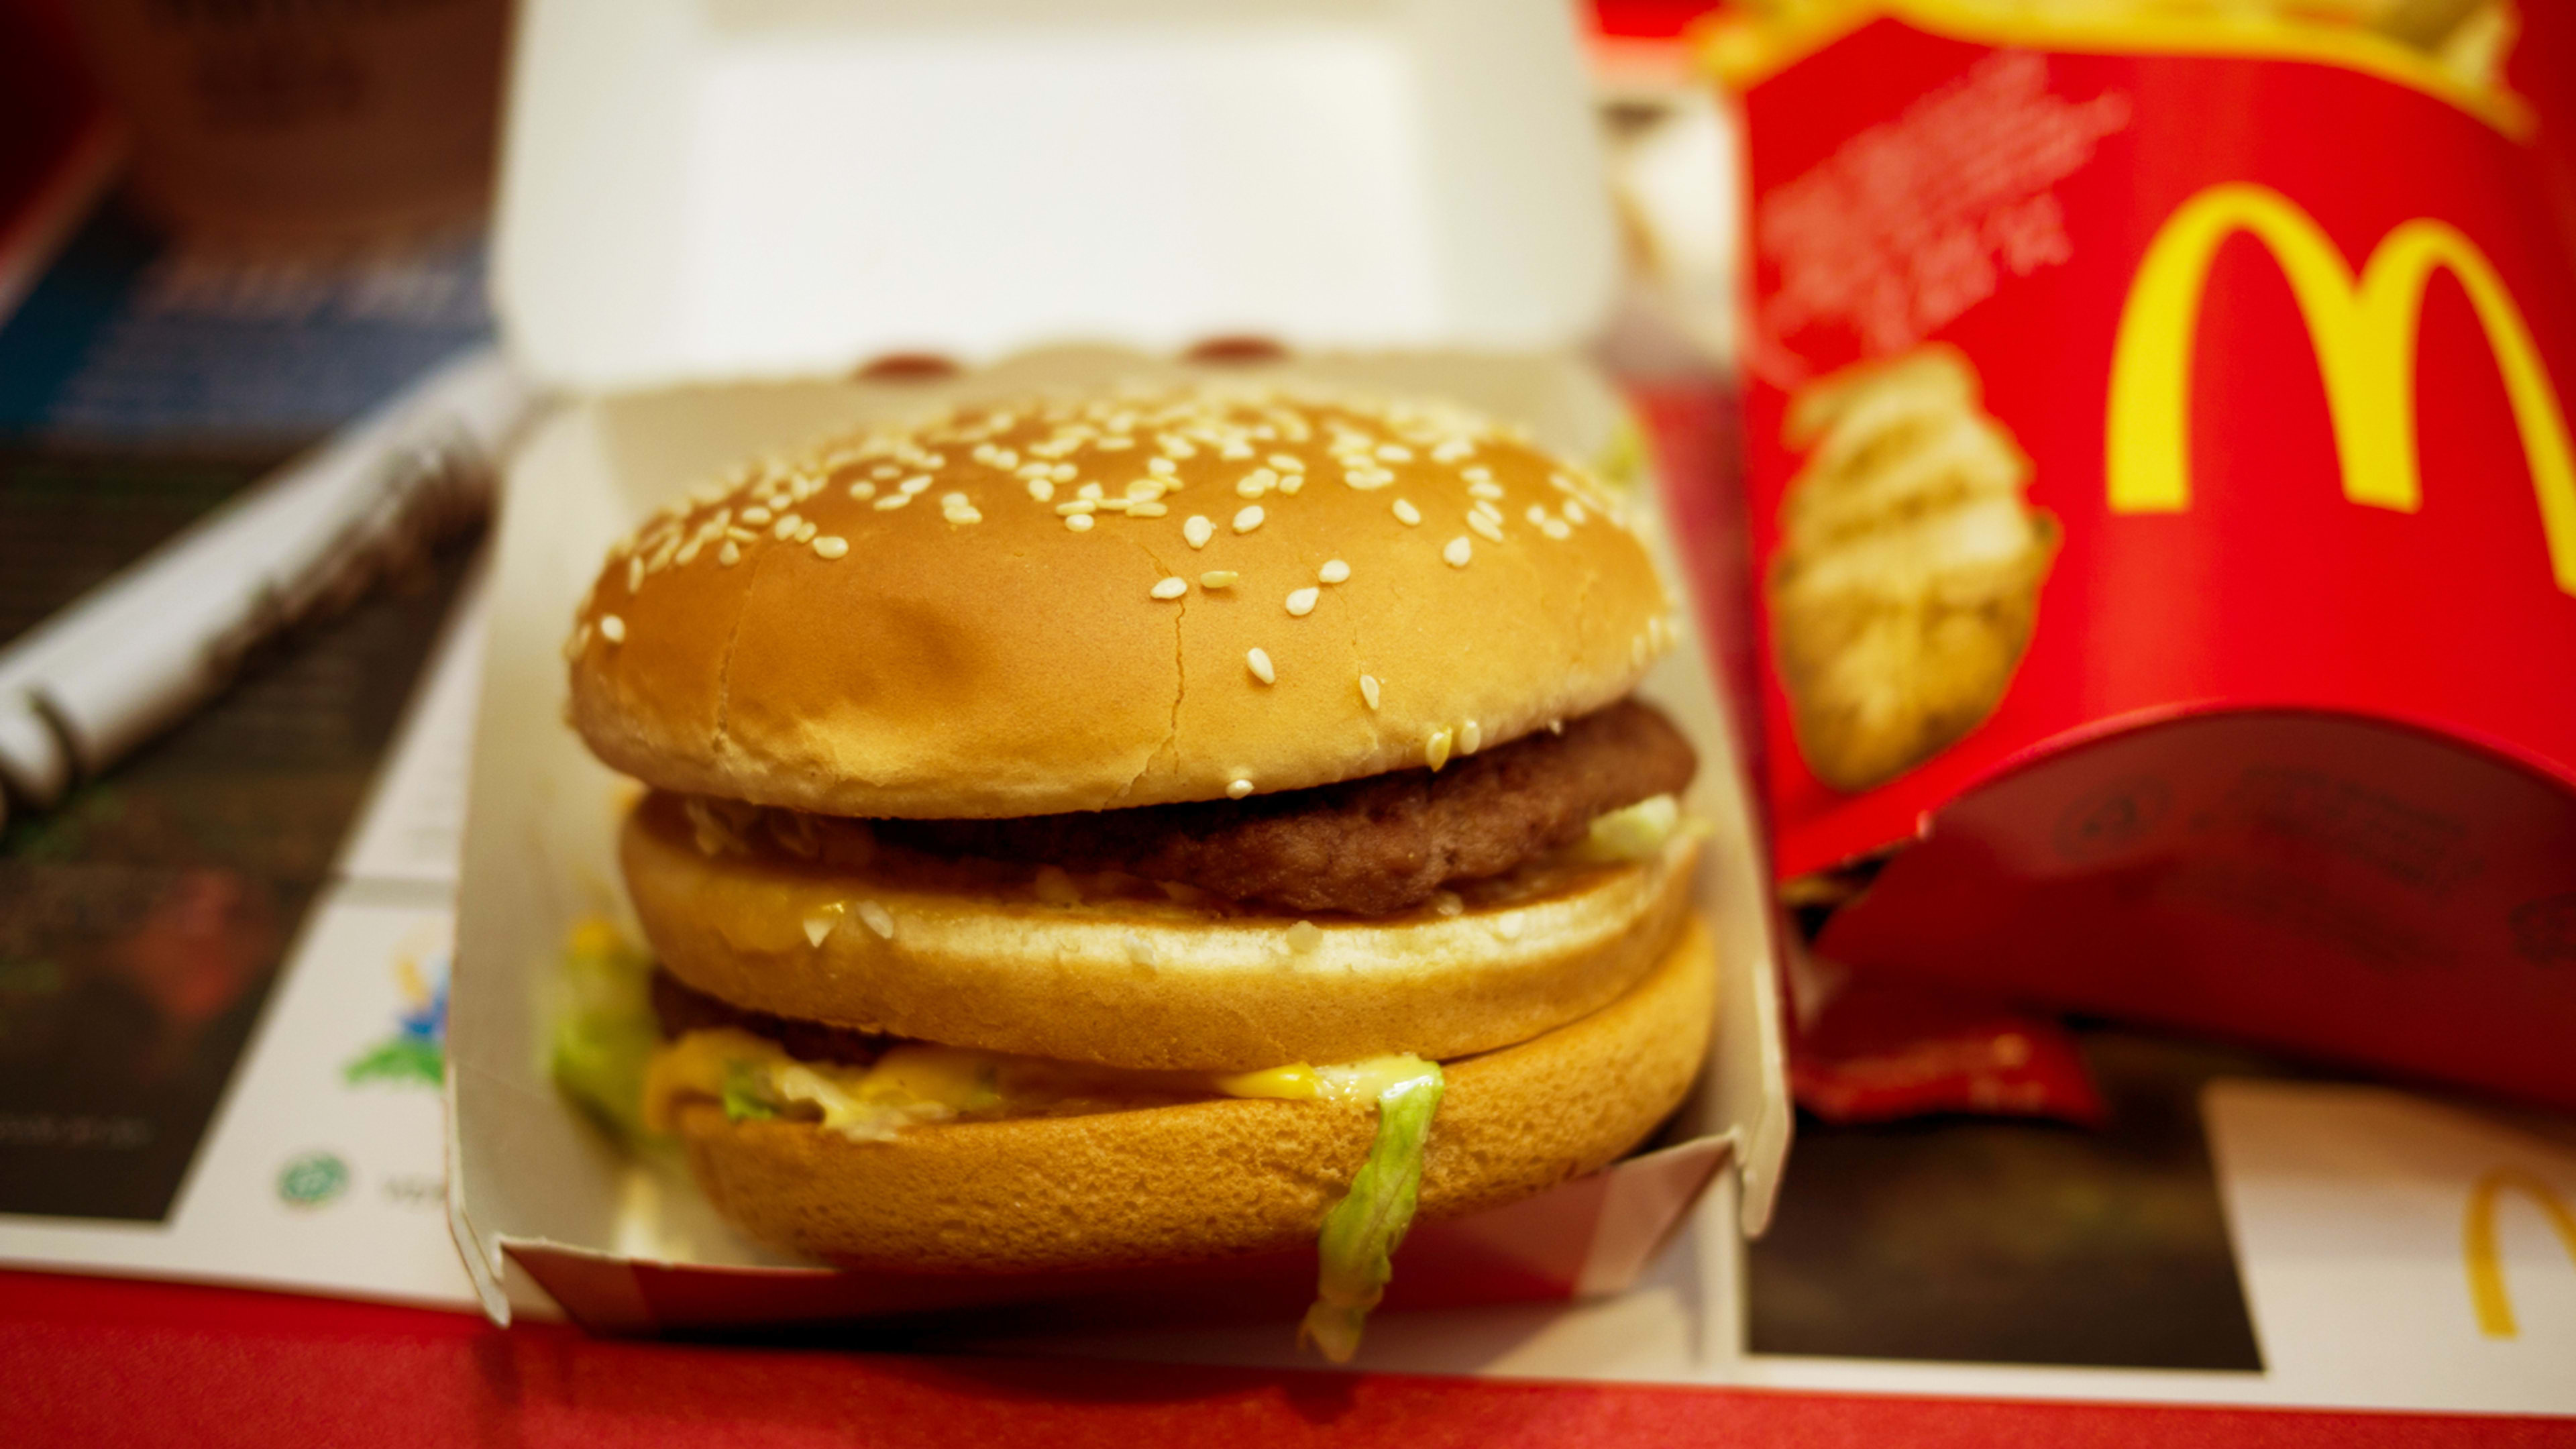 Now’s your chance to sell a Big Mac counterfeit in Europe!